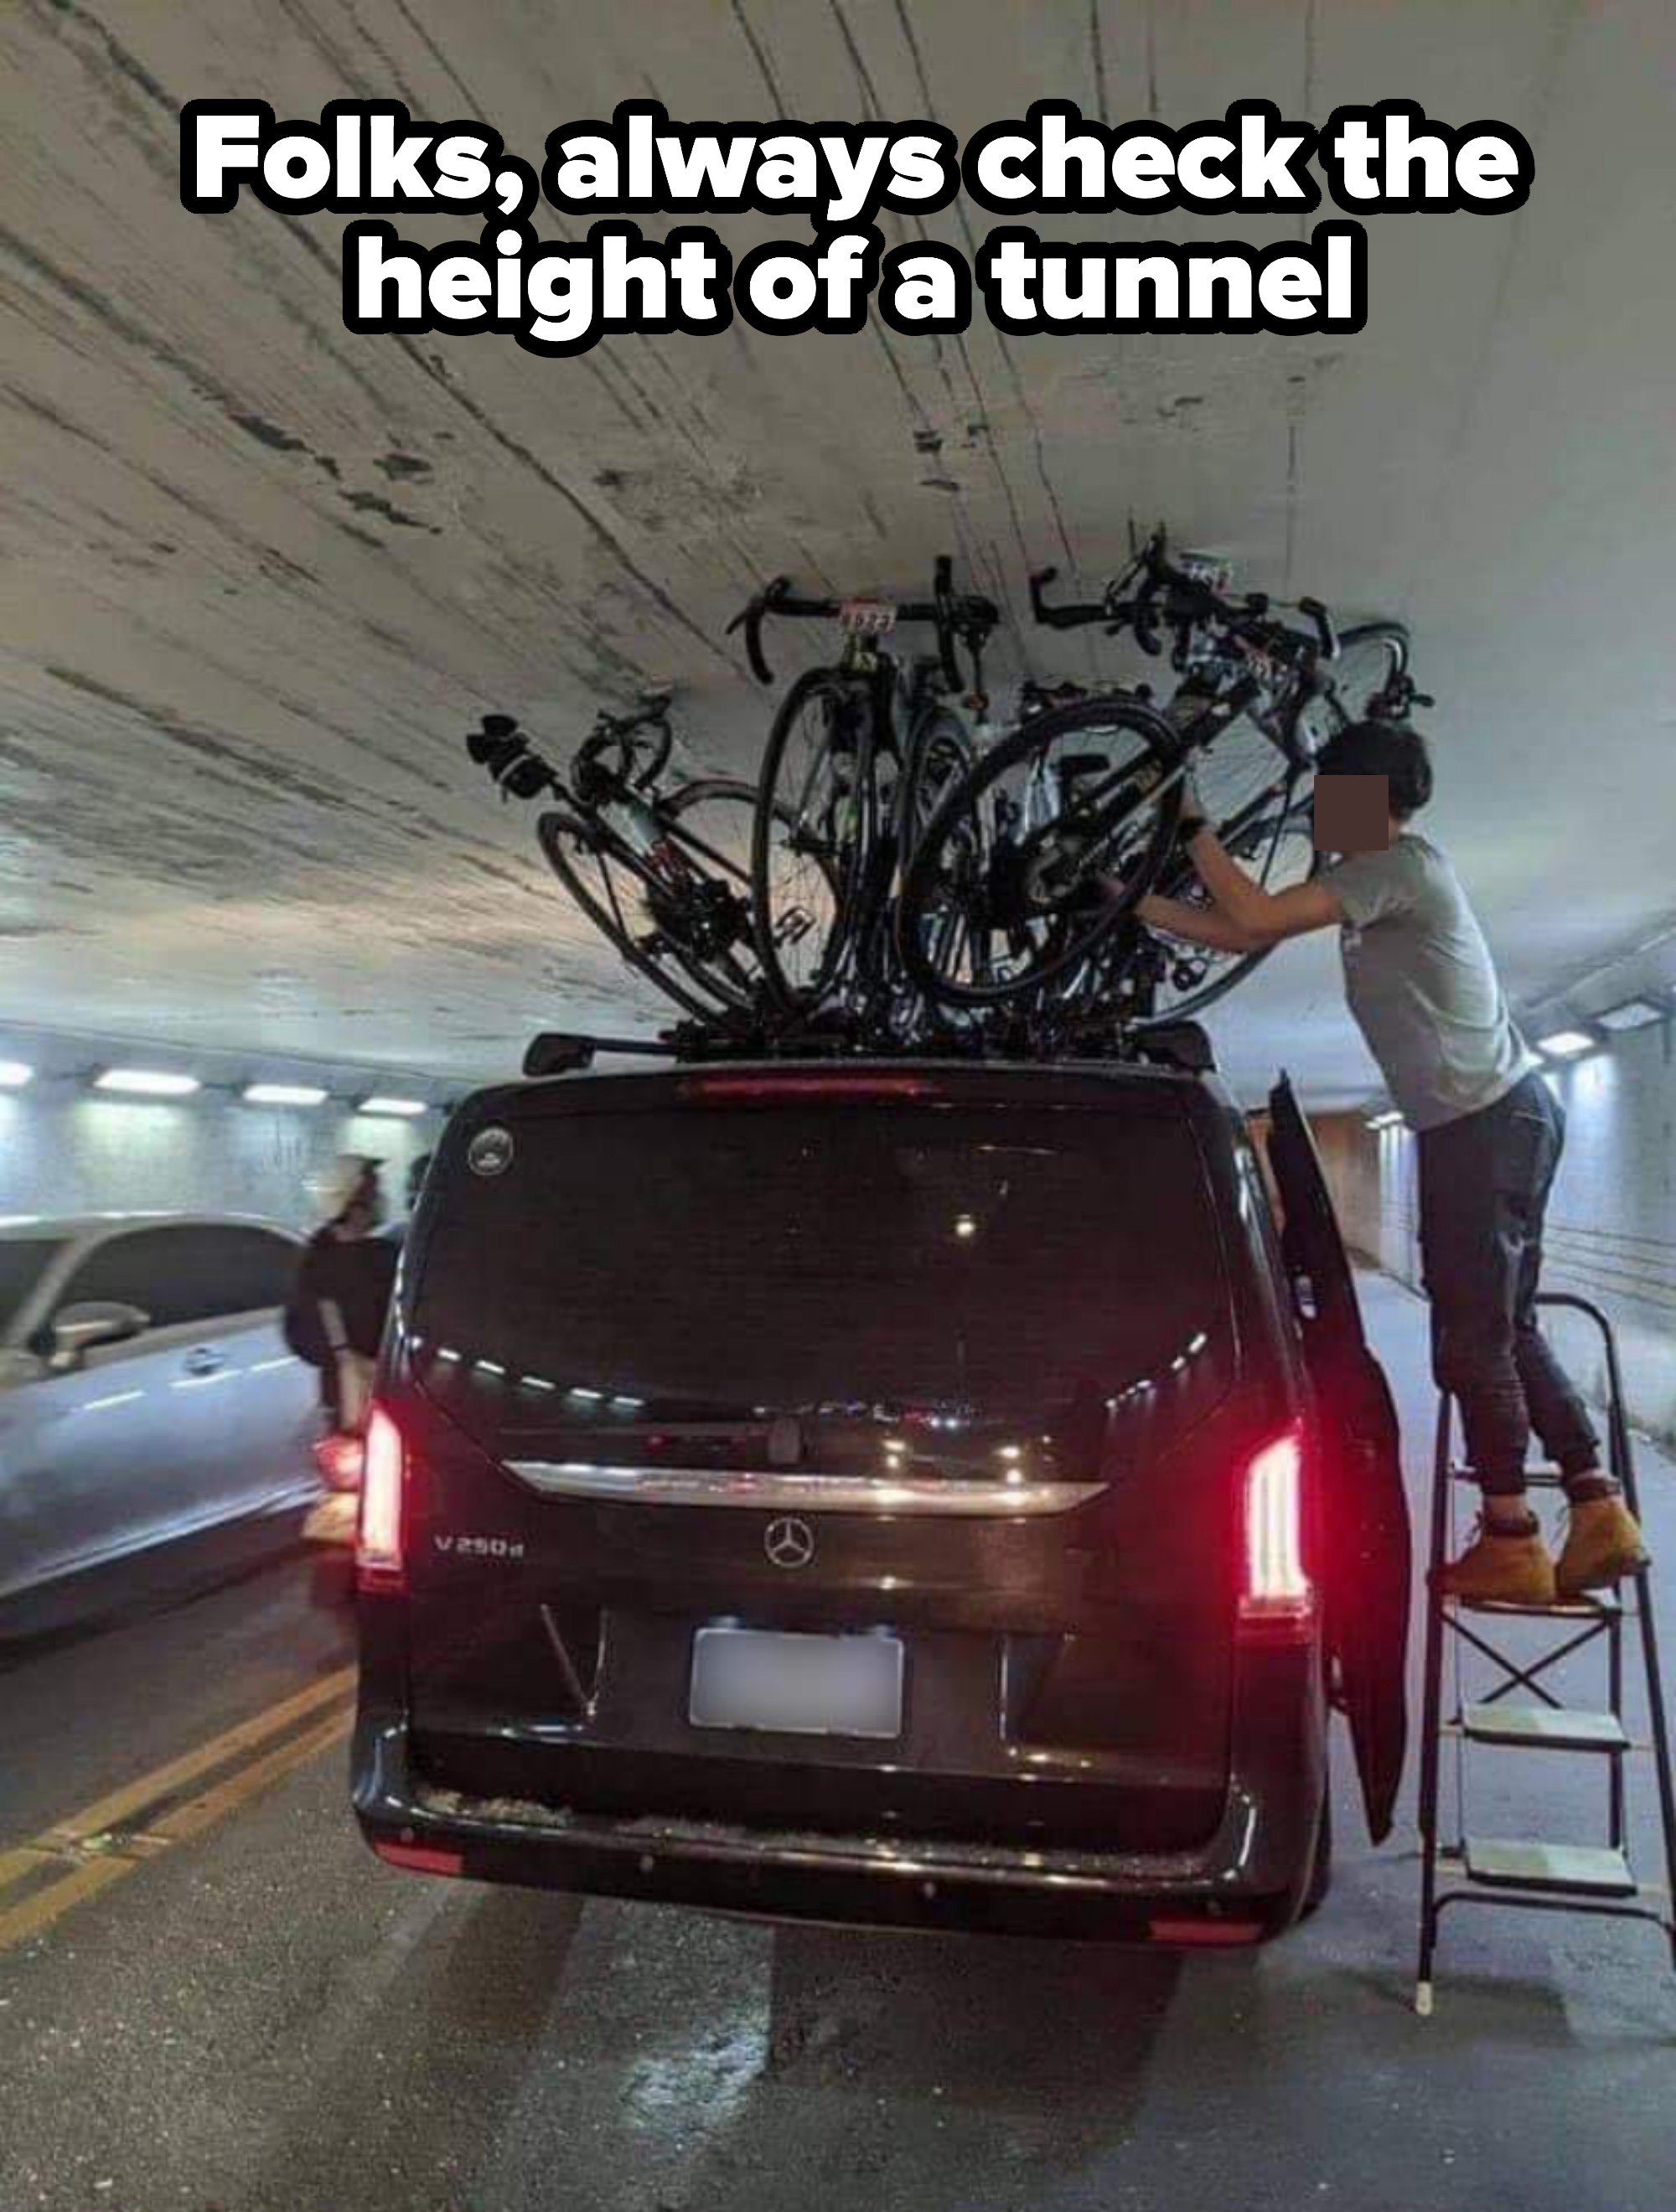 People putting bikes on top of a car